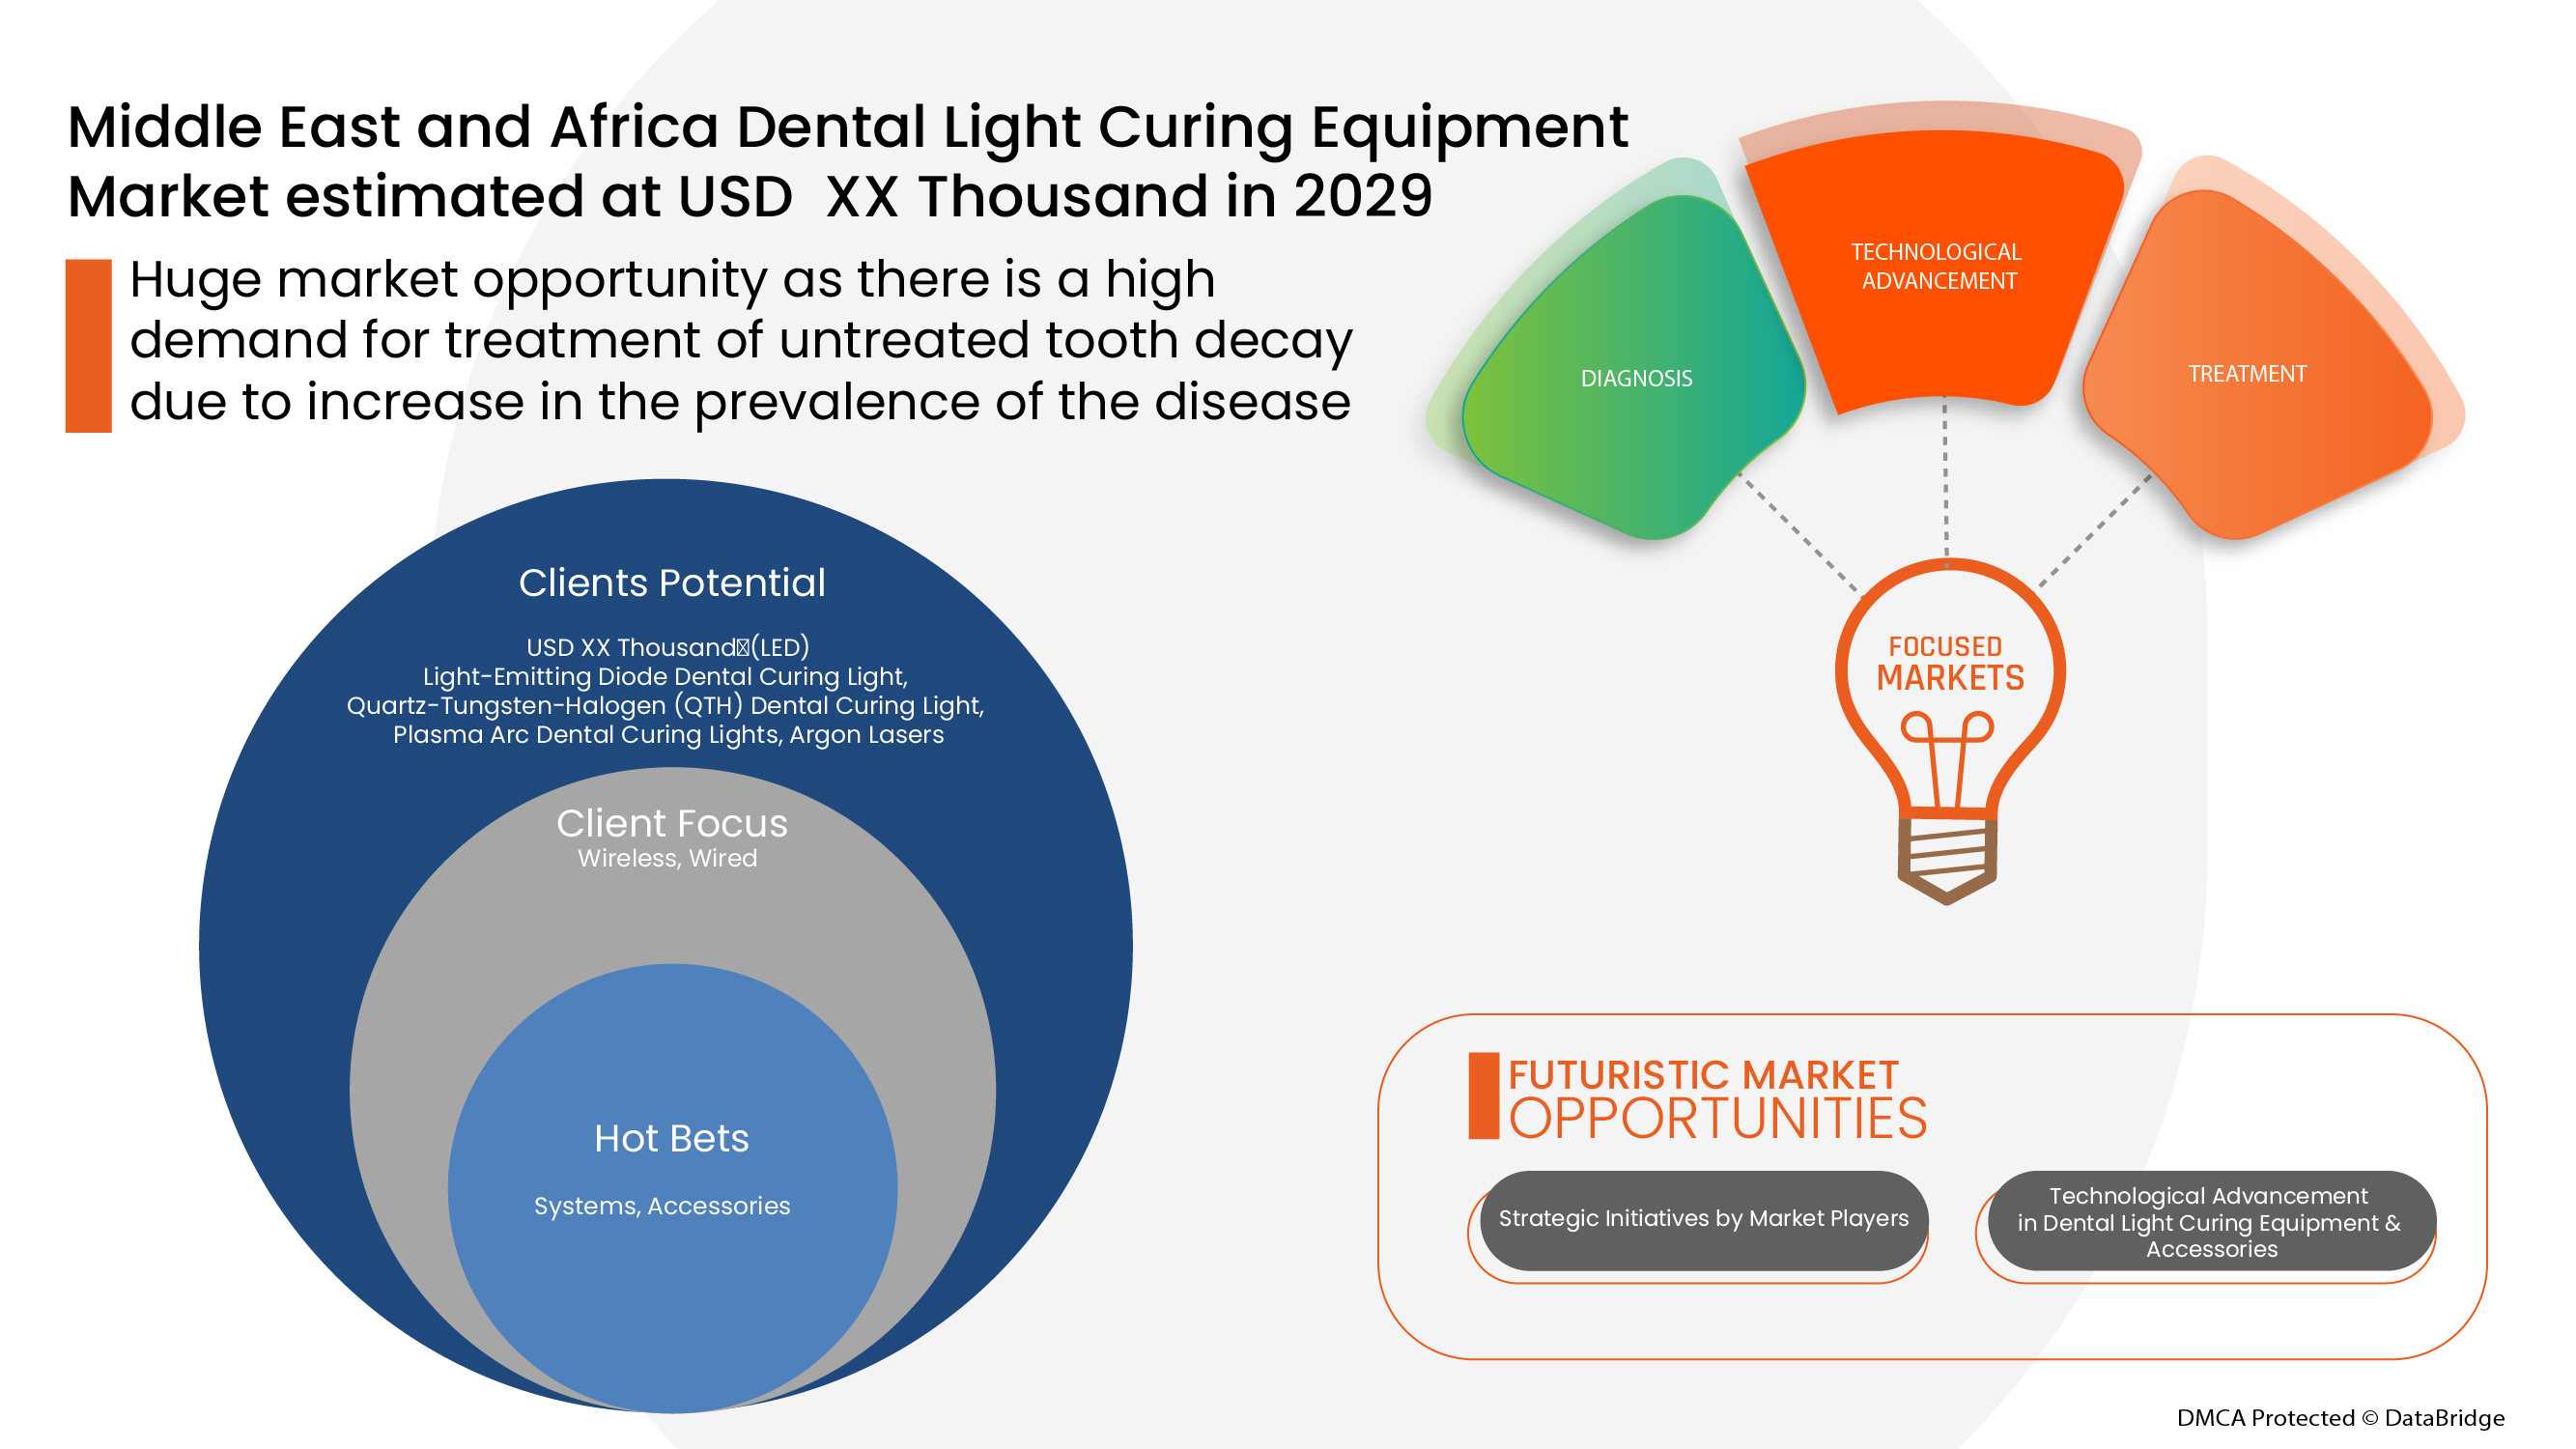 Middle East and Africa Dental Light Curing Equipment Market